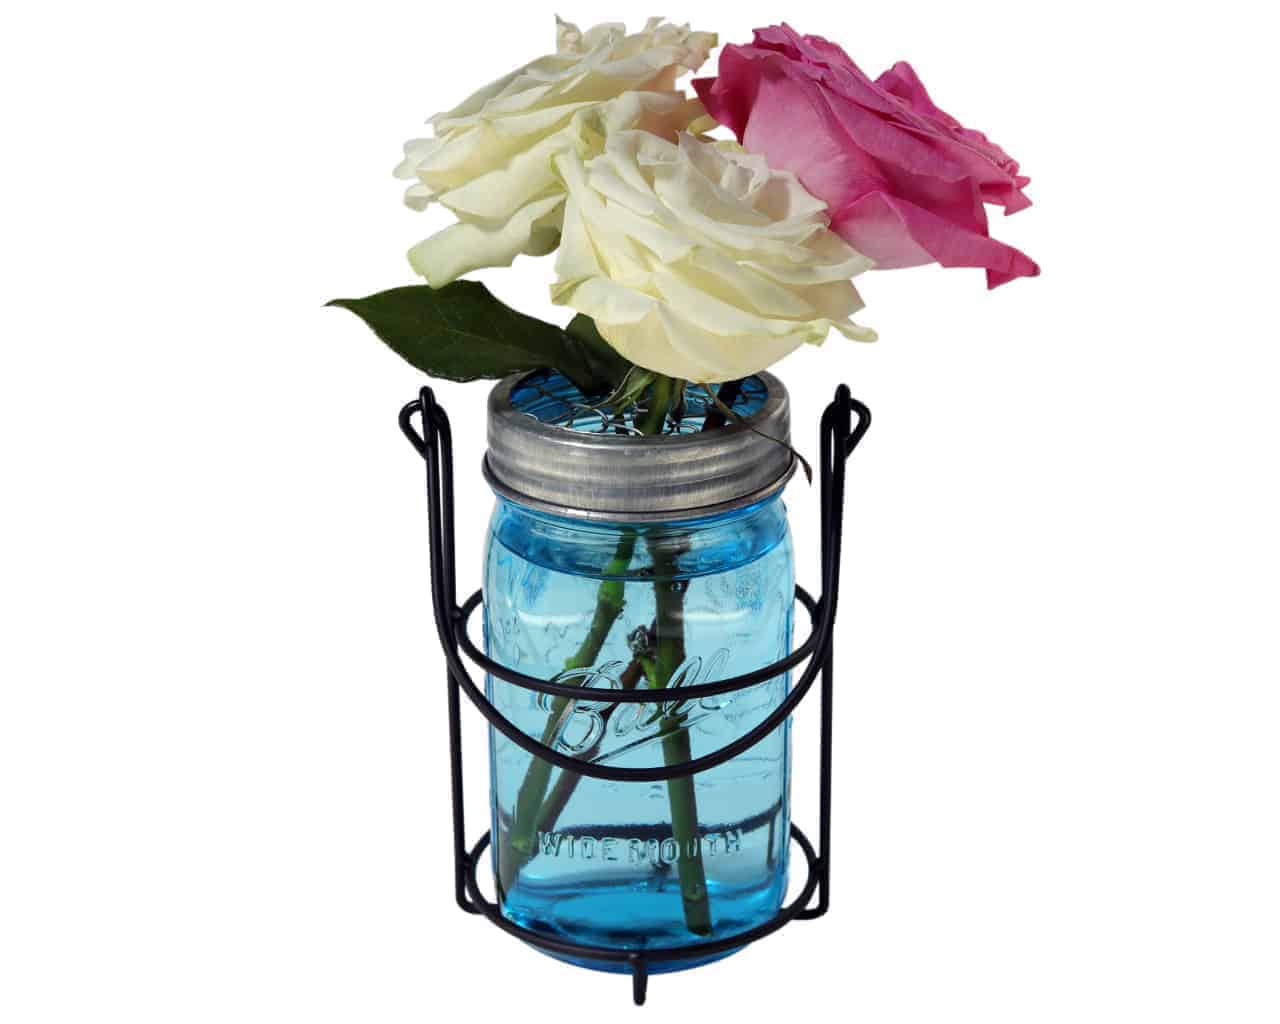 One jar caddy for hanging quart 32oz Mason jars with blue Ball jar, galvanized flower frog lid, and roses